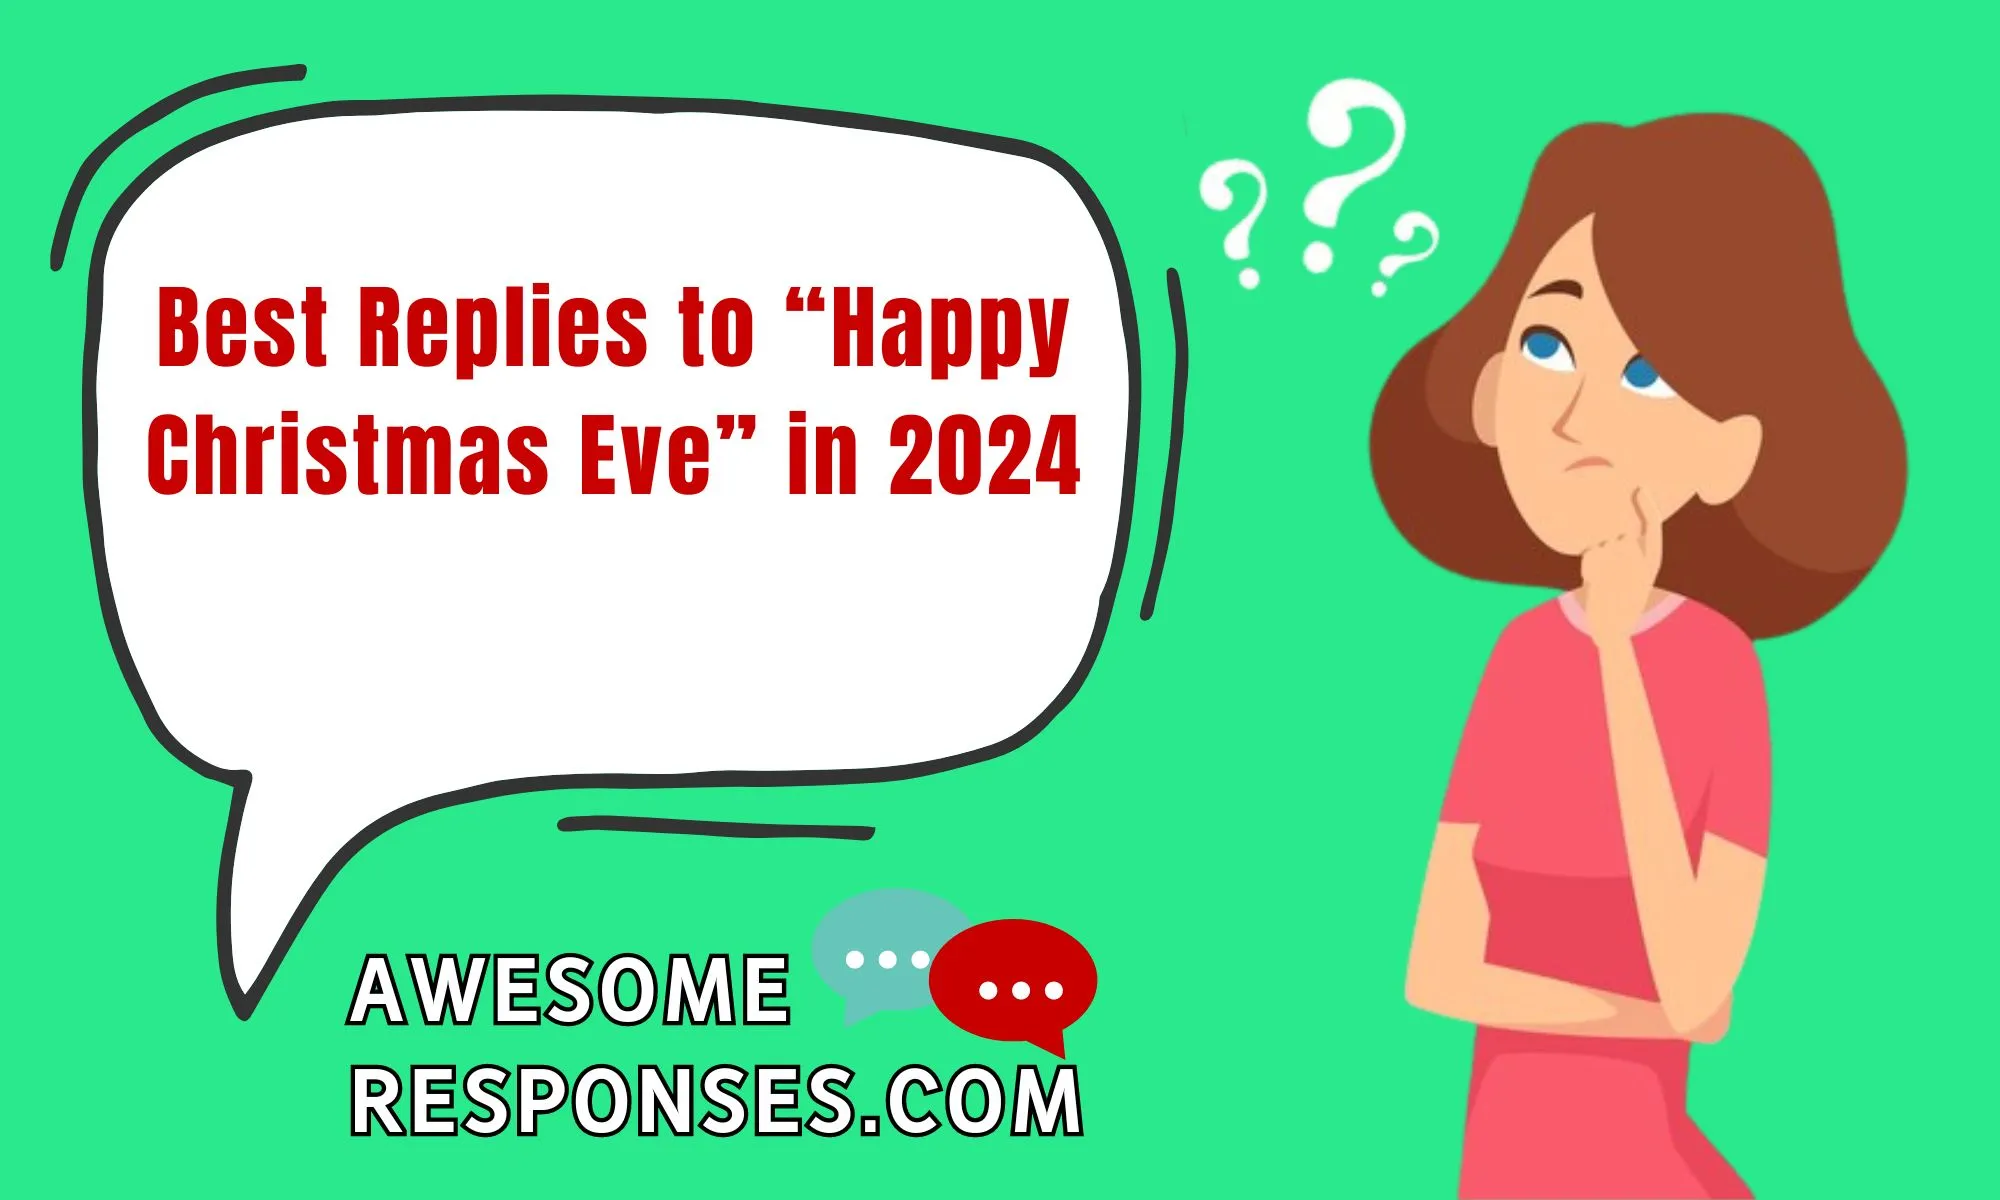 Best Replies to “Happy Christmas Eve” in 2024